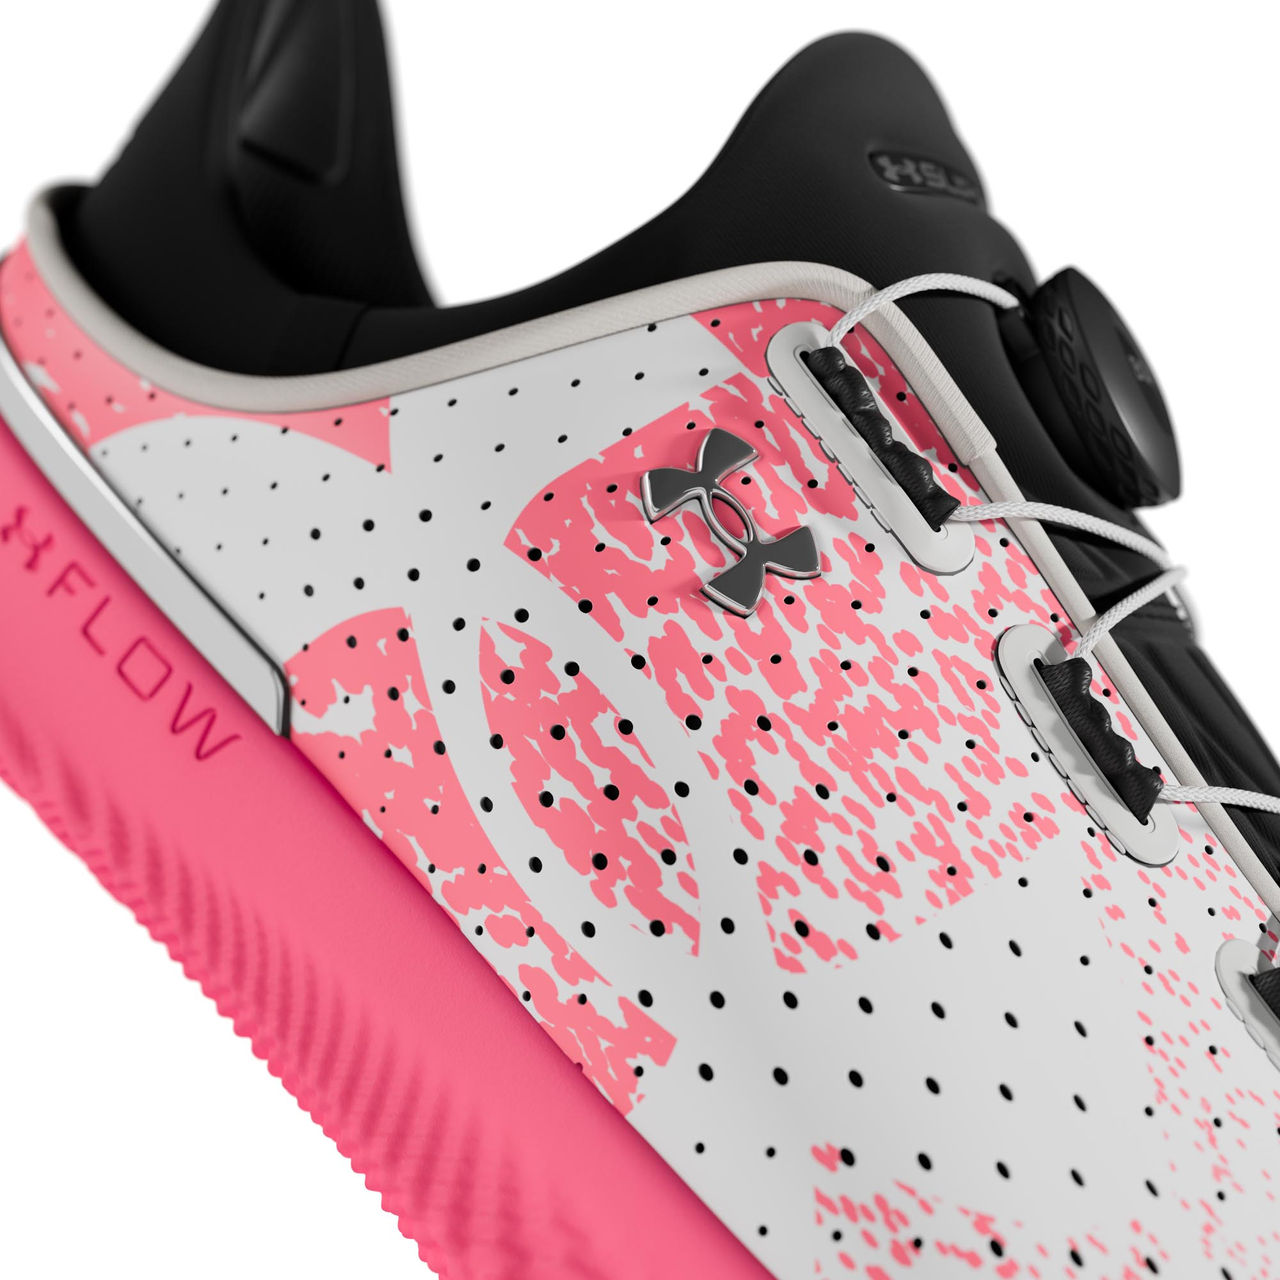 Zapatillas Running Under Armour Charged Surpass Mujer Rosa